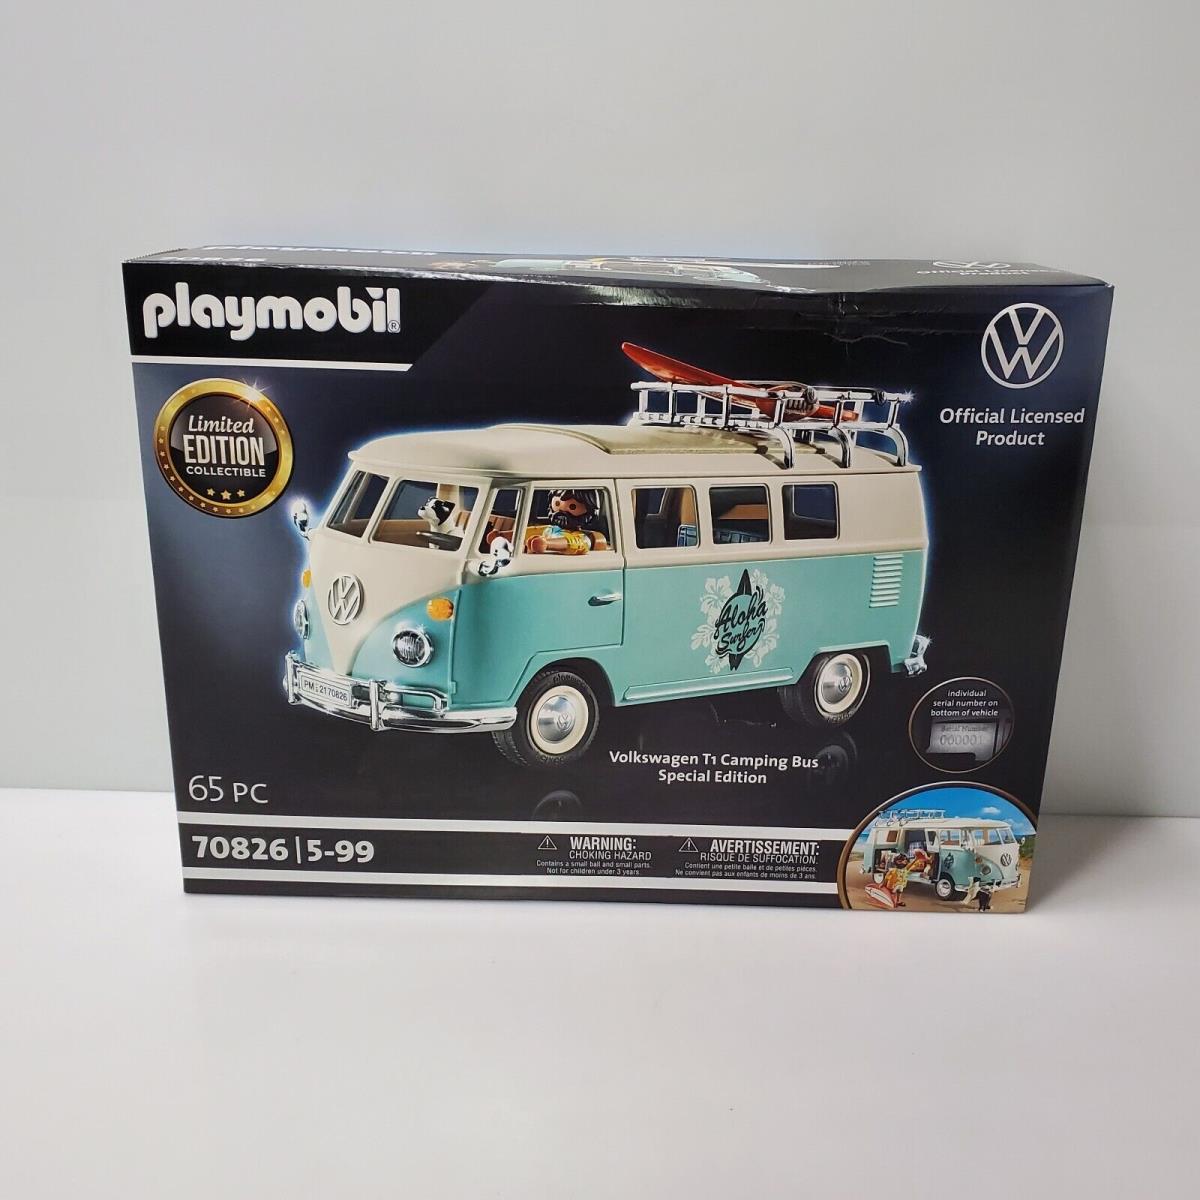 Playmobil 70826 Volkswagen T1 Camping Bus Special Edition Limited Blue